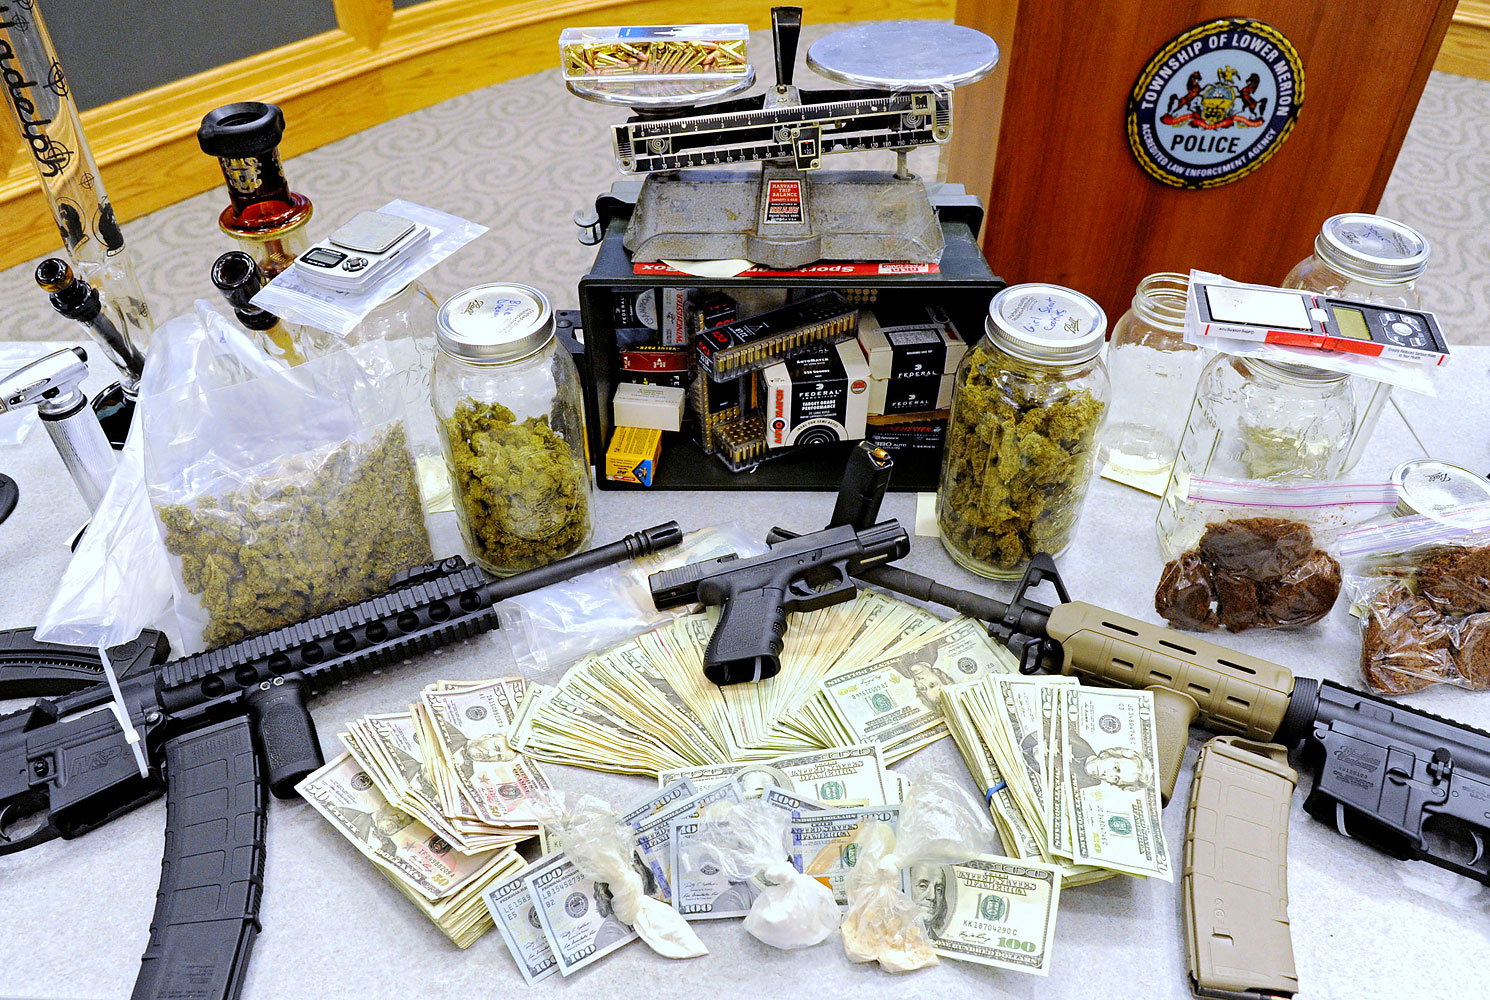 Drugs, guns and other illegal items were seized when Lower Merion Police broke up a drug-distribution ring in Montgomery County, Pa. (Clem Murray—The Philadelphia Inquirer/AP)